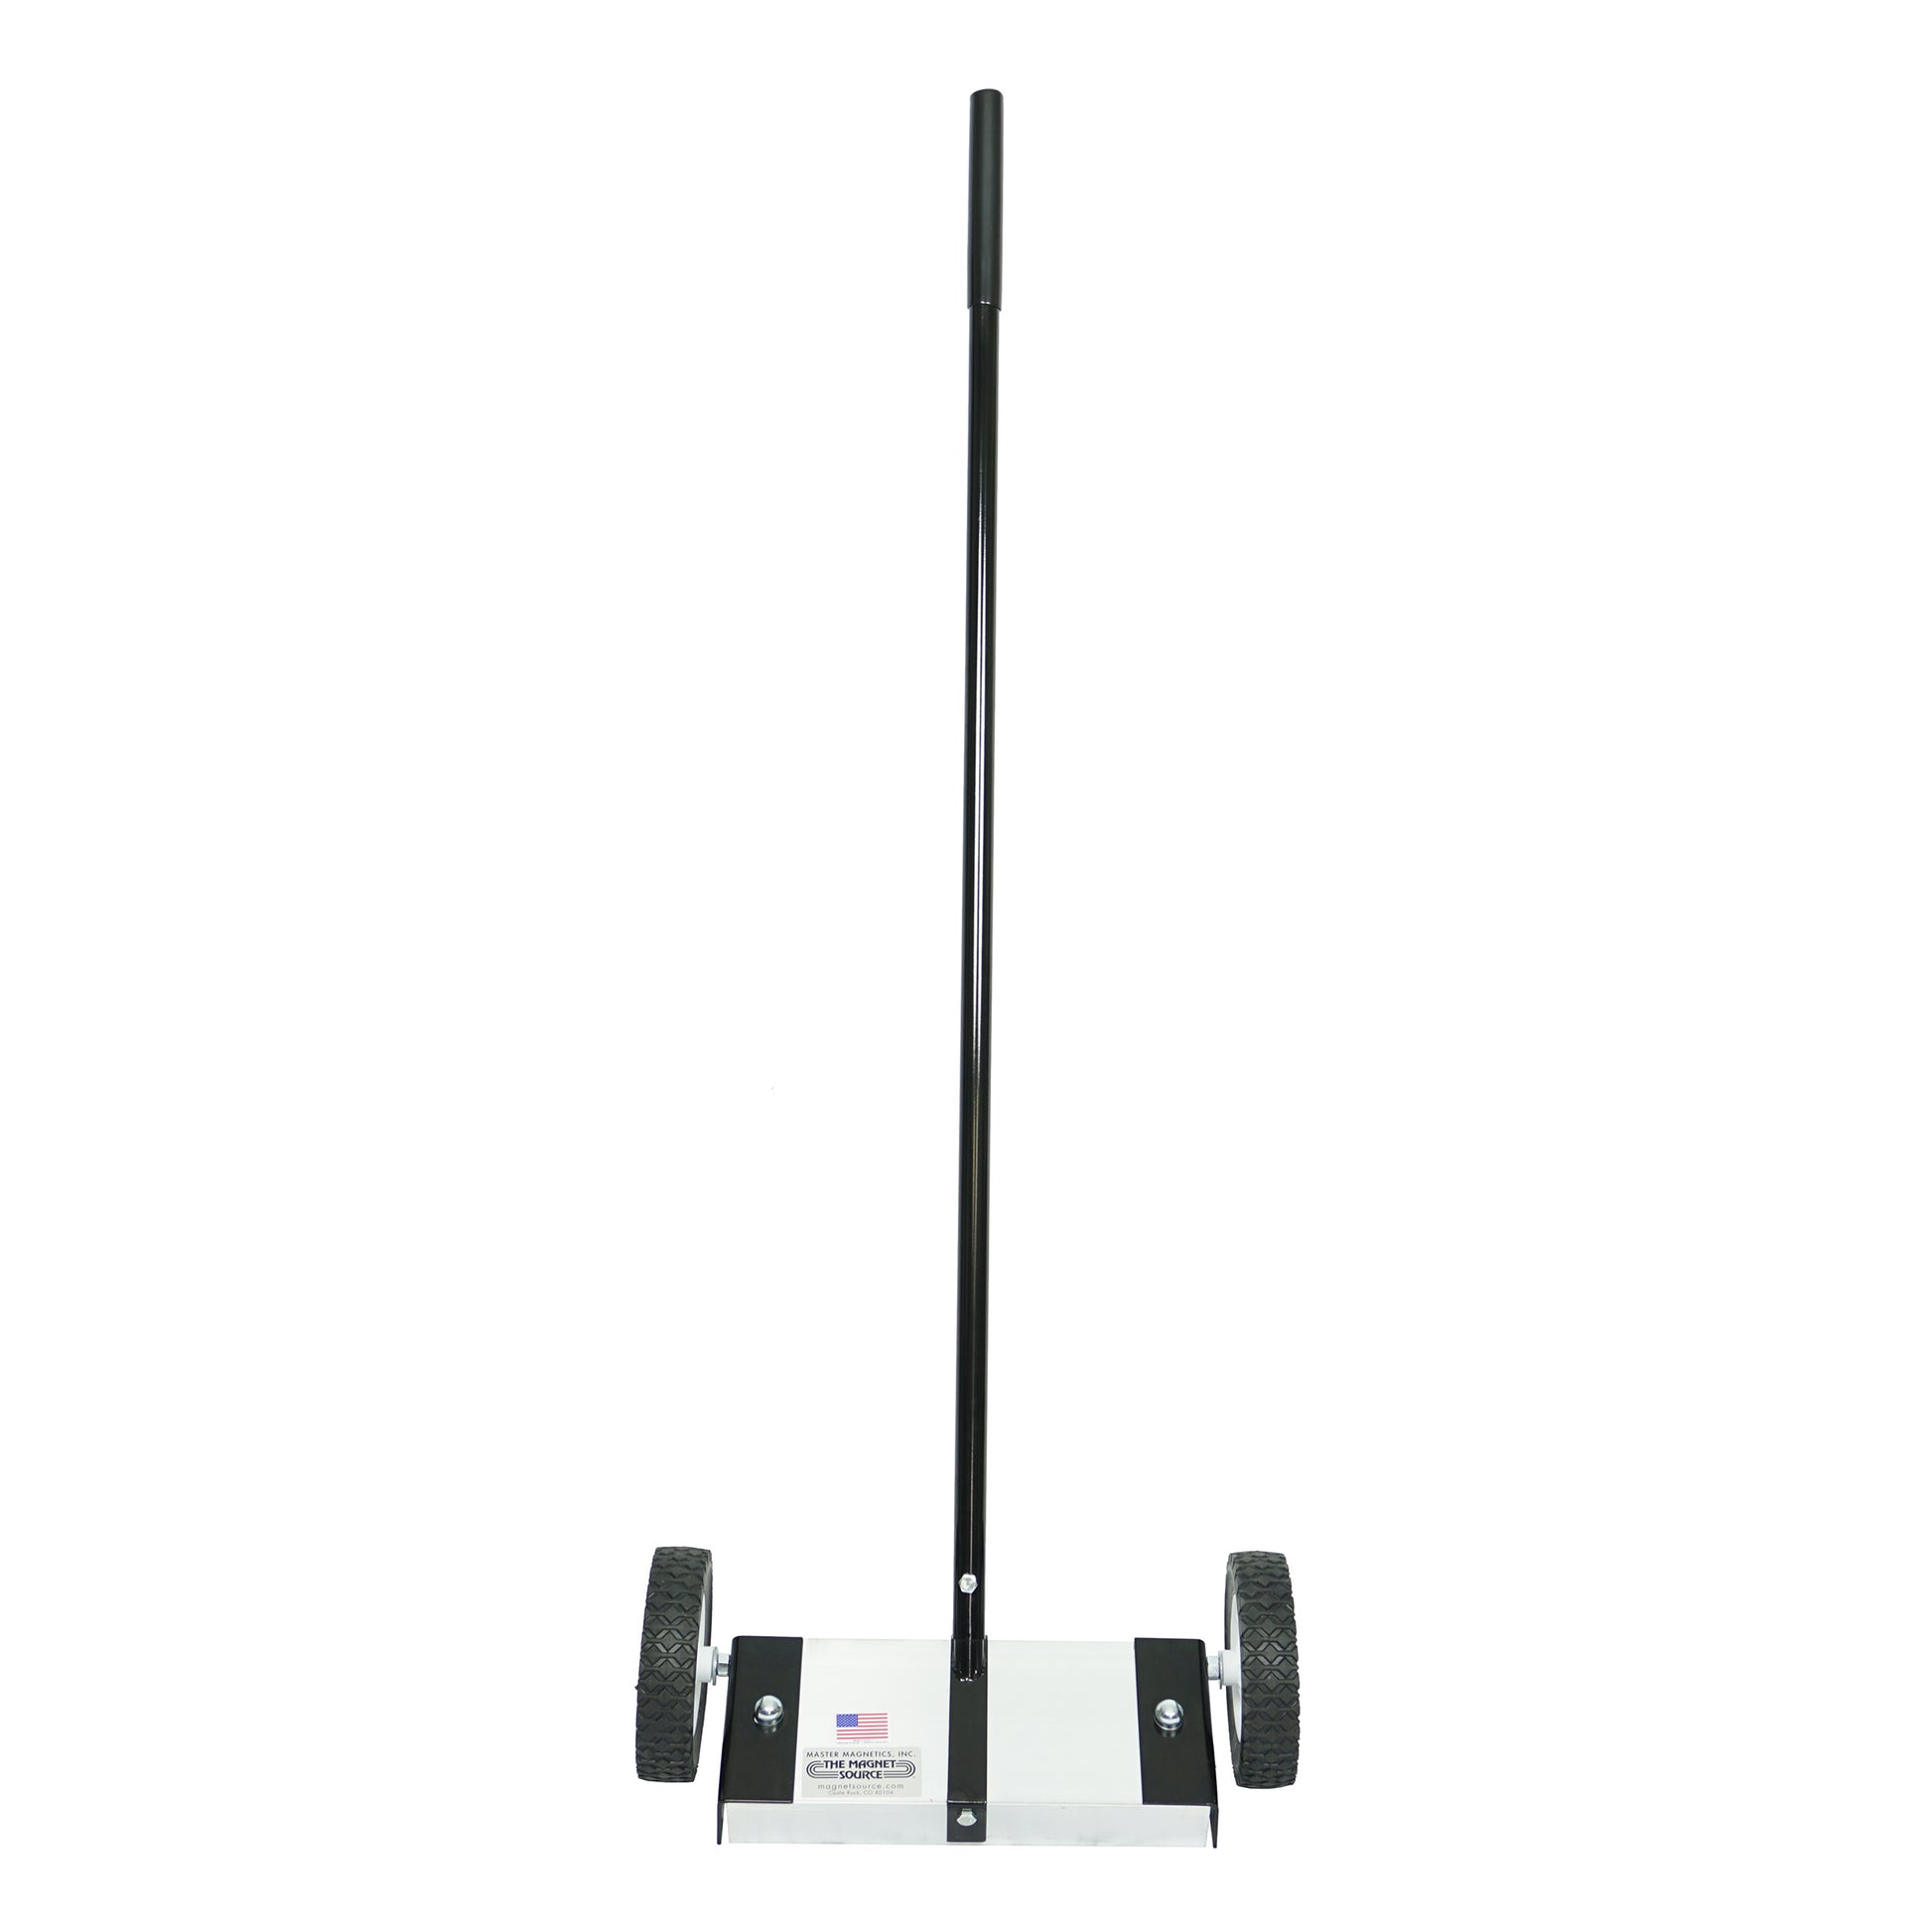 Load image into Gallery viewer, MFSM12 Magnetic Floor Sweeper - Back View